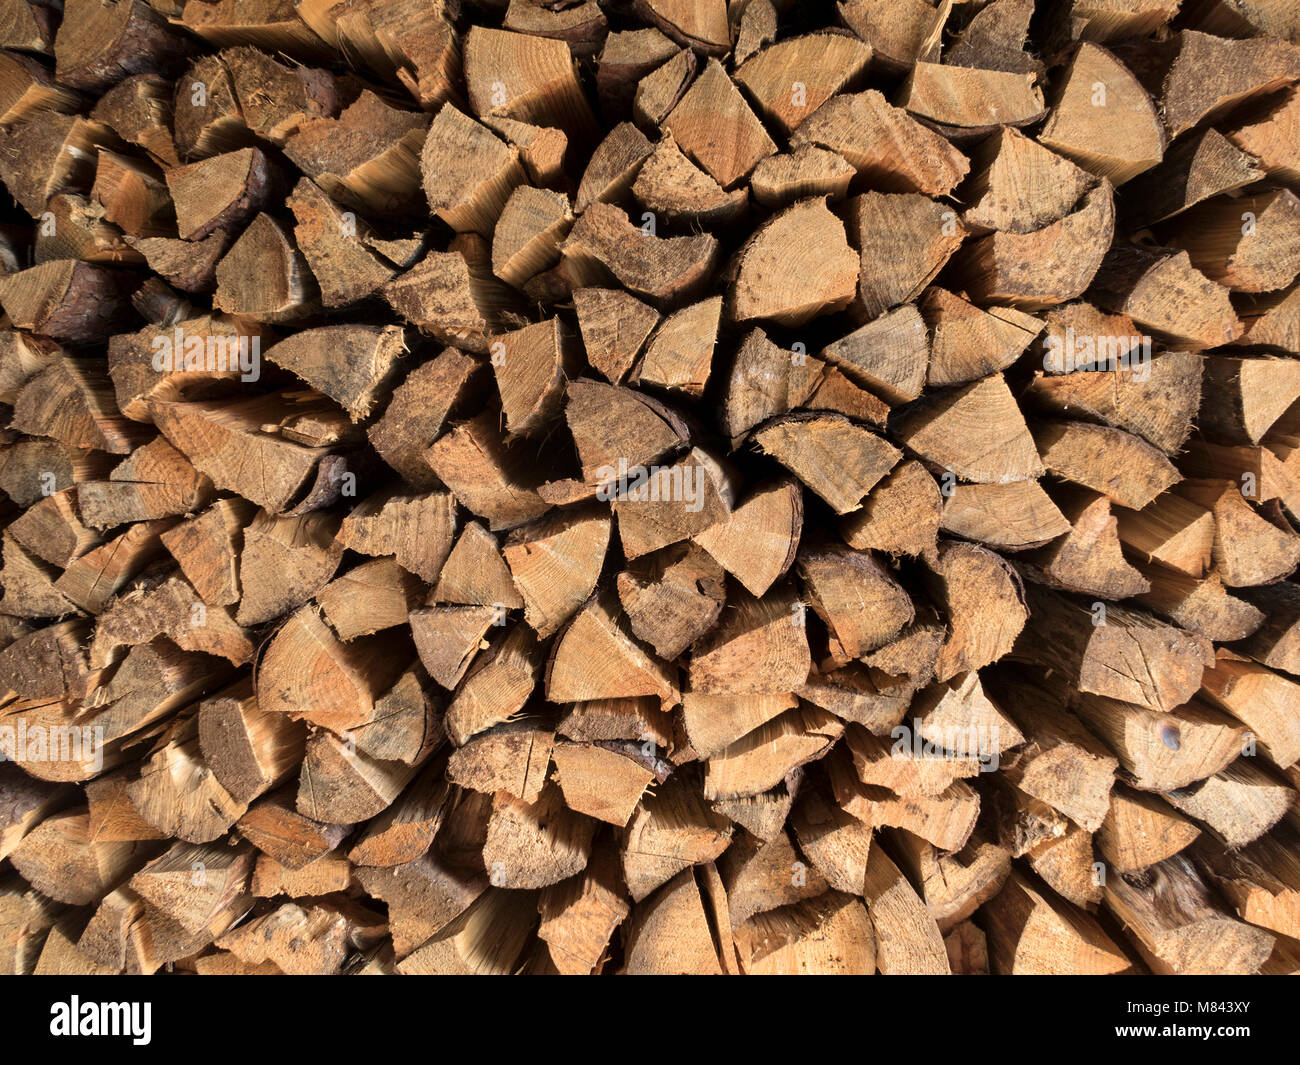 Stacked firewood Stock Photo